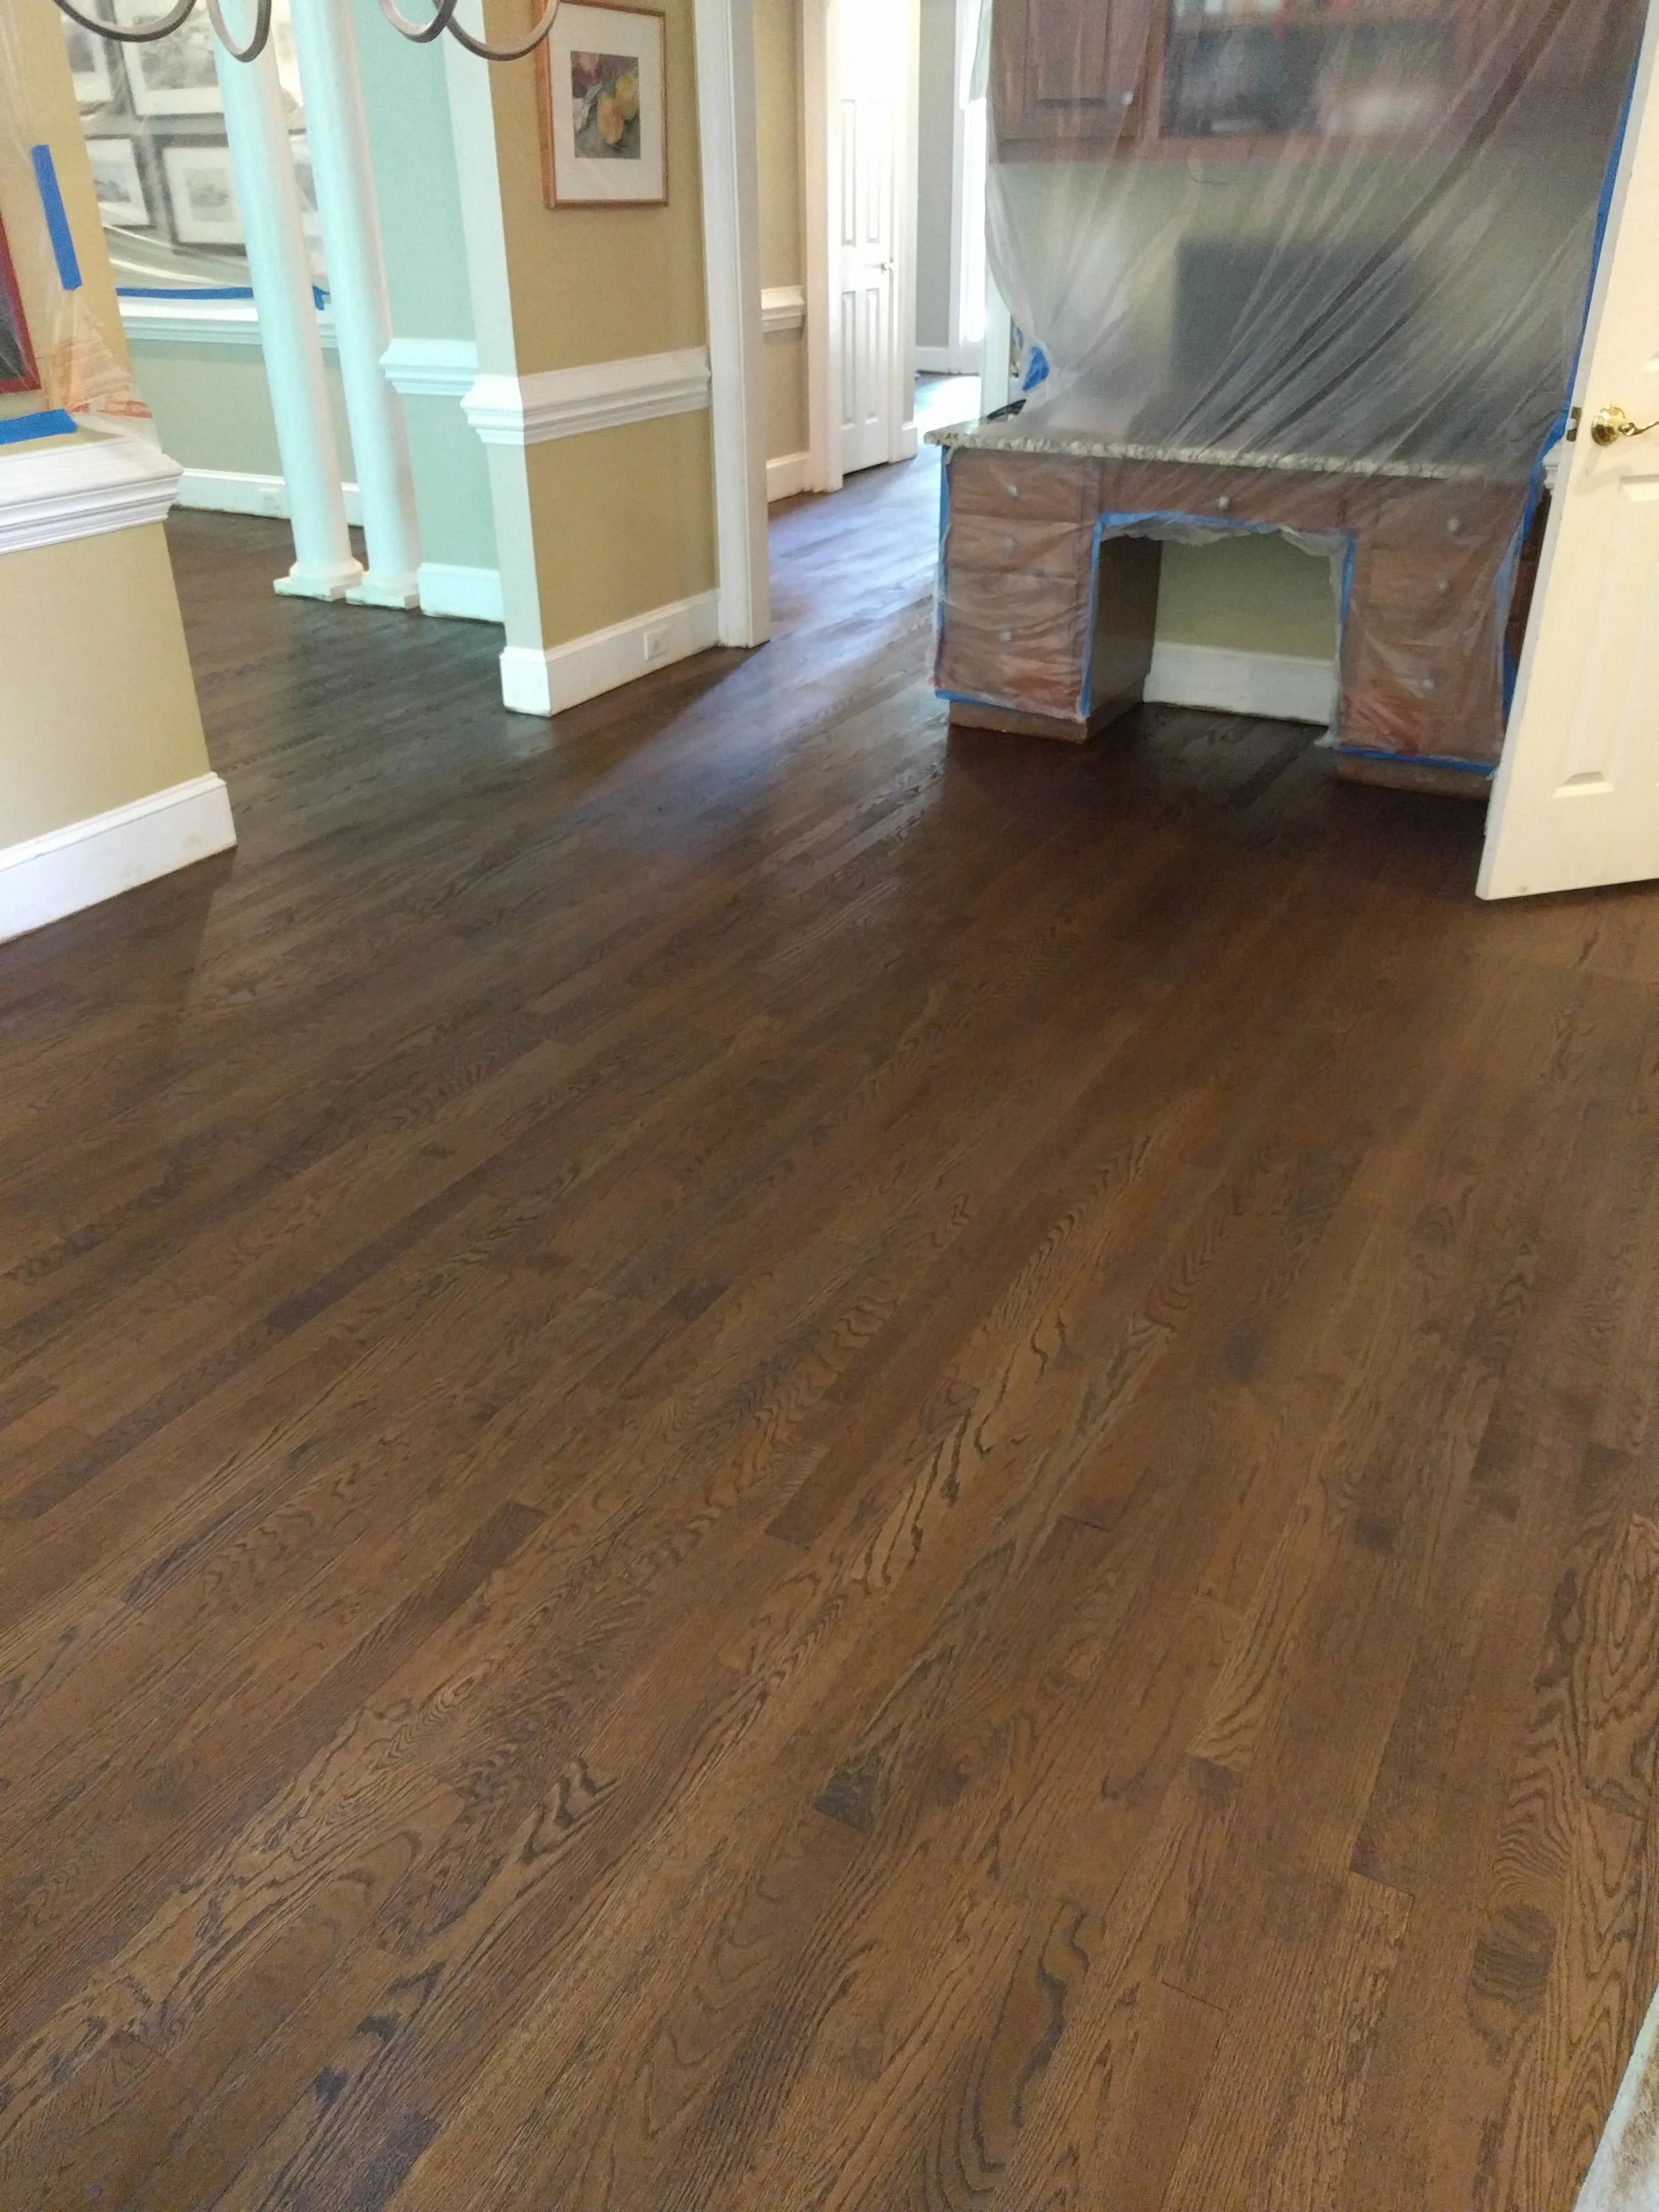 Second image of new floors